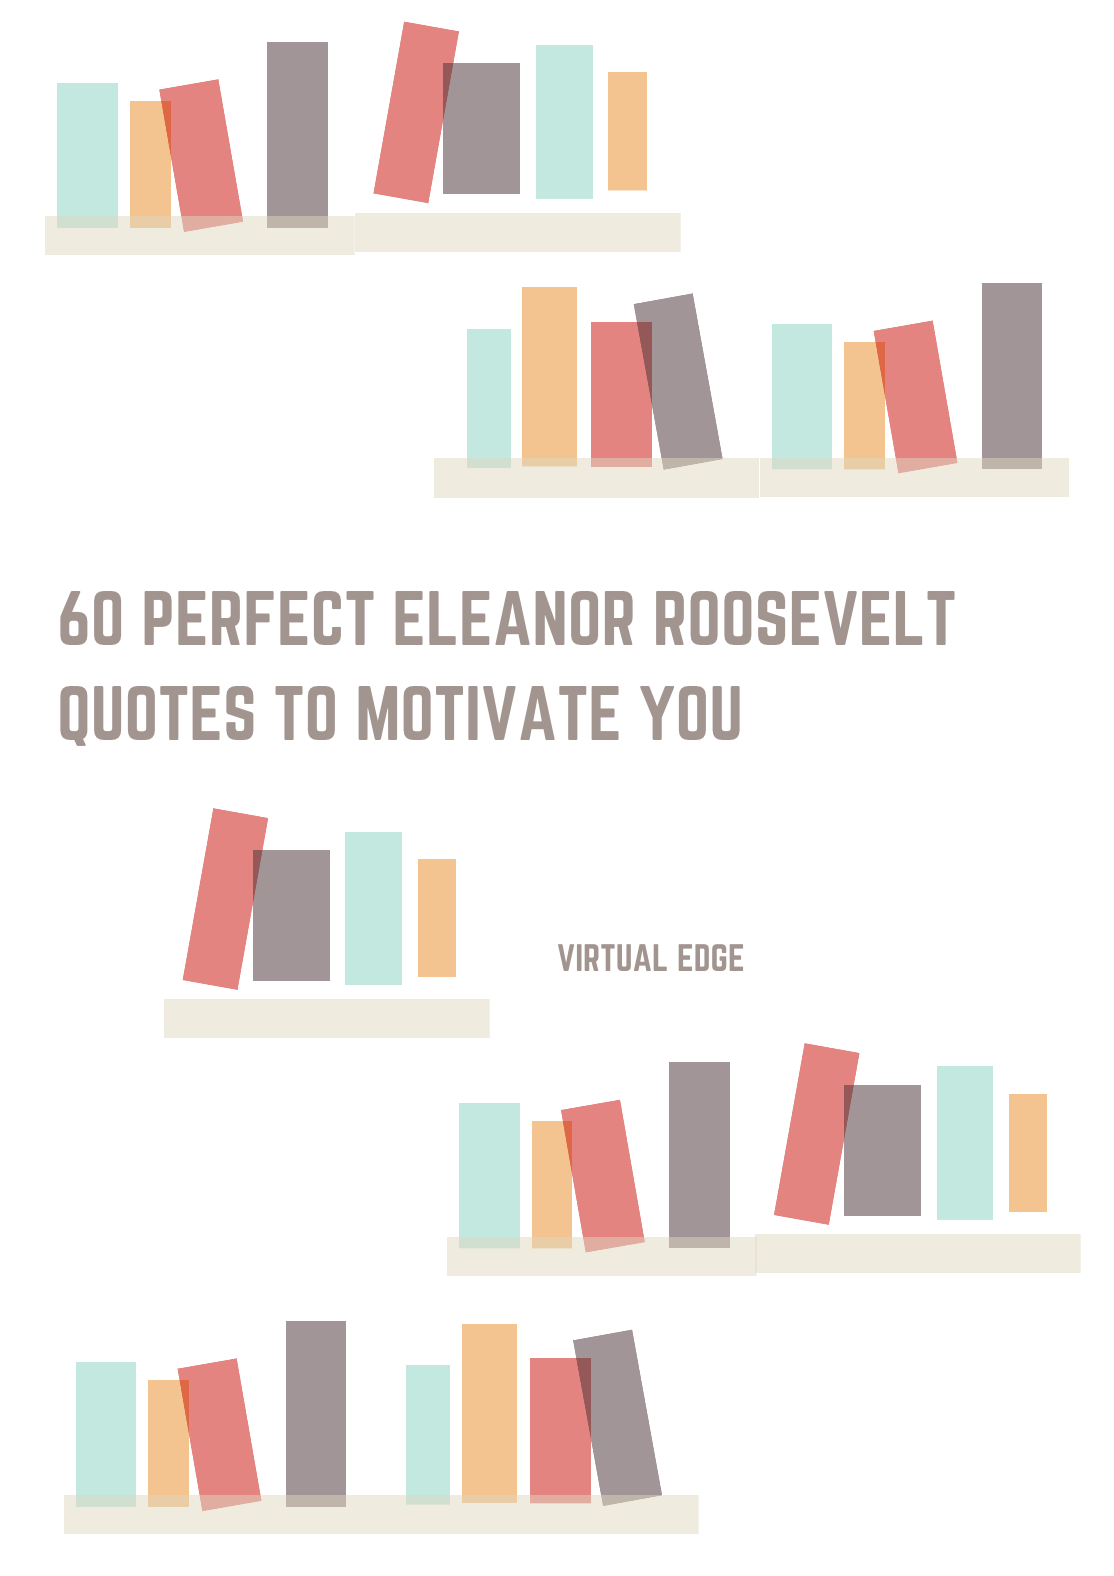 60 Perfect Eleanor Roosevelt Quotes to Motivate You